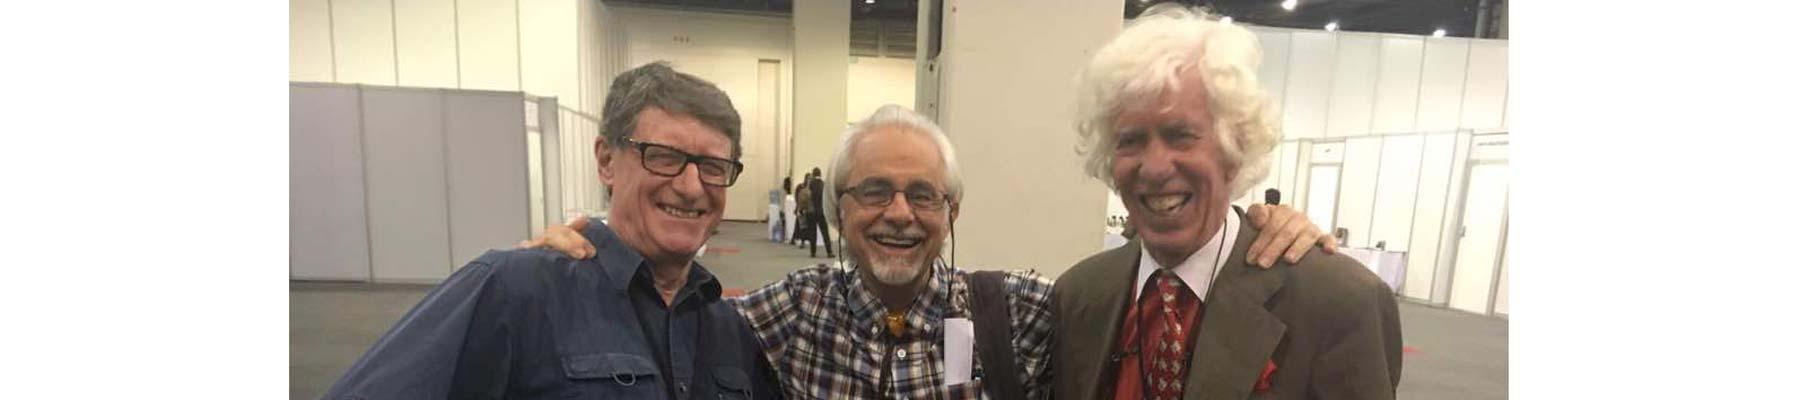 (l to r): Dan Stiles, Tom Milliken and Esmond Bradley Martin, photographed at CITES CoP17 in South Africa, 2016